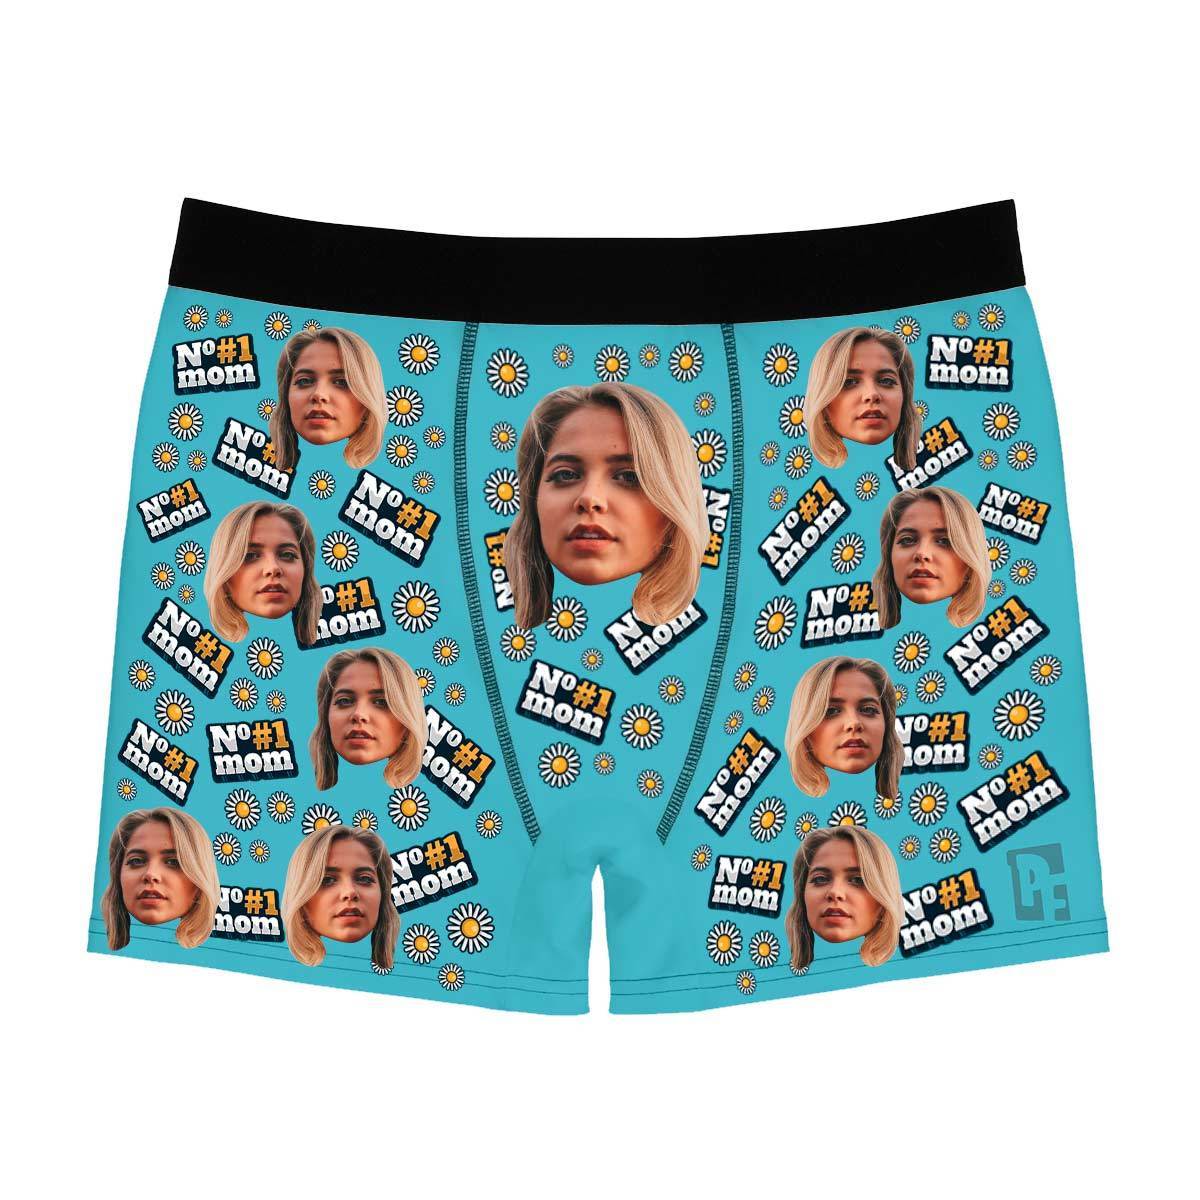 Blue #1 Mom men's boxer briefs personalized with photo printed on them